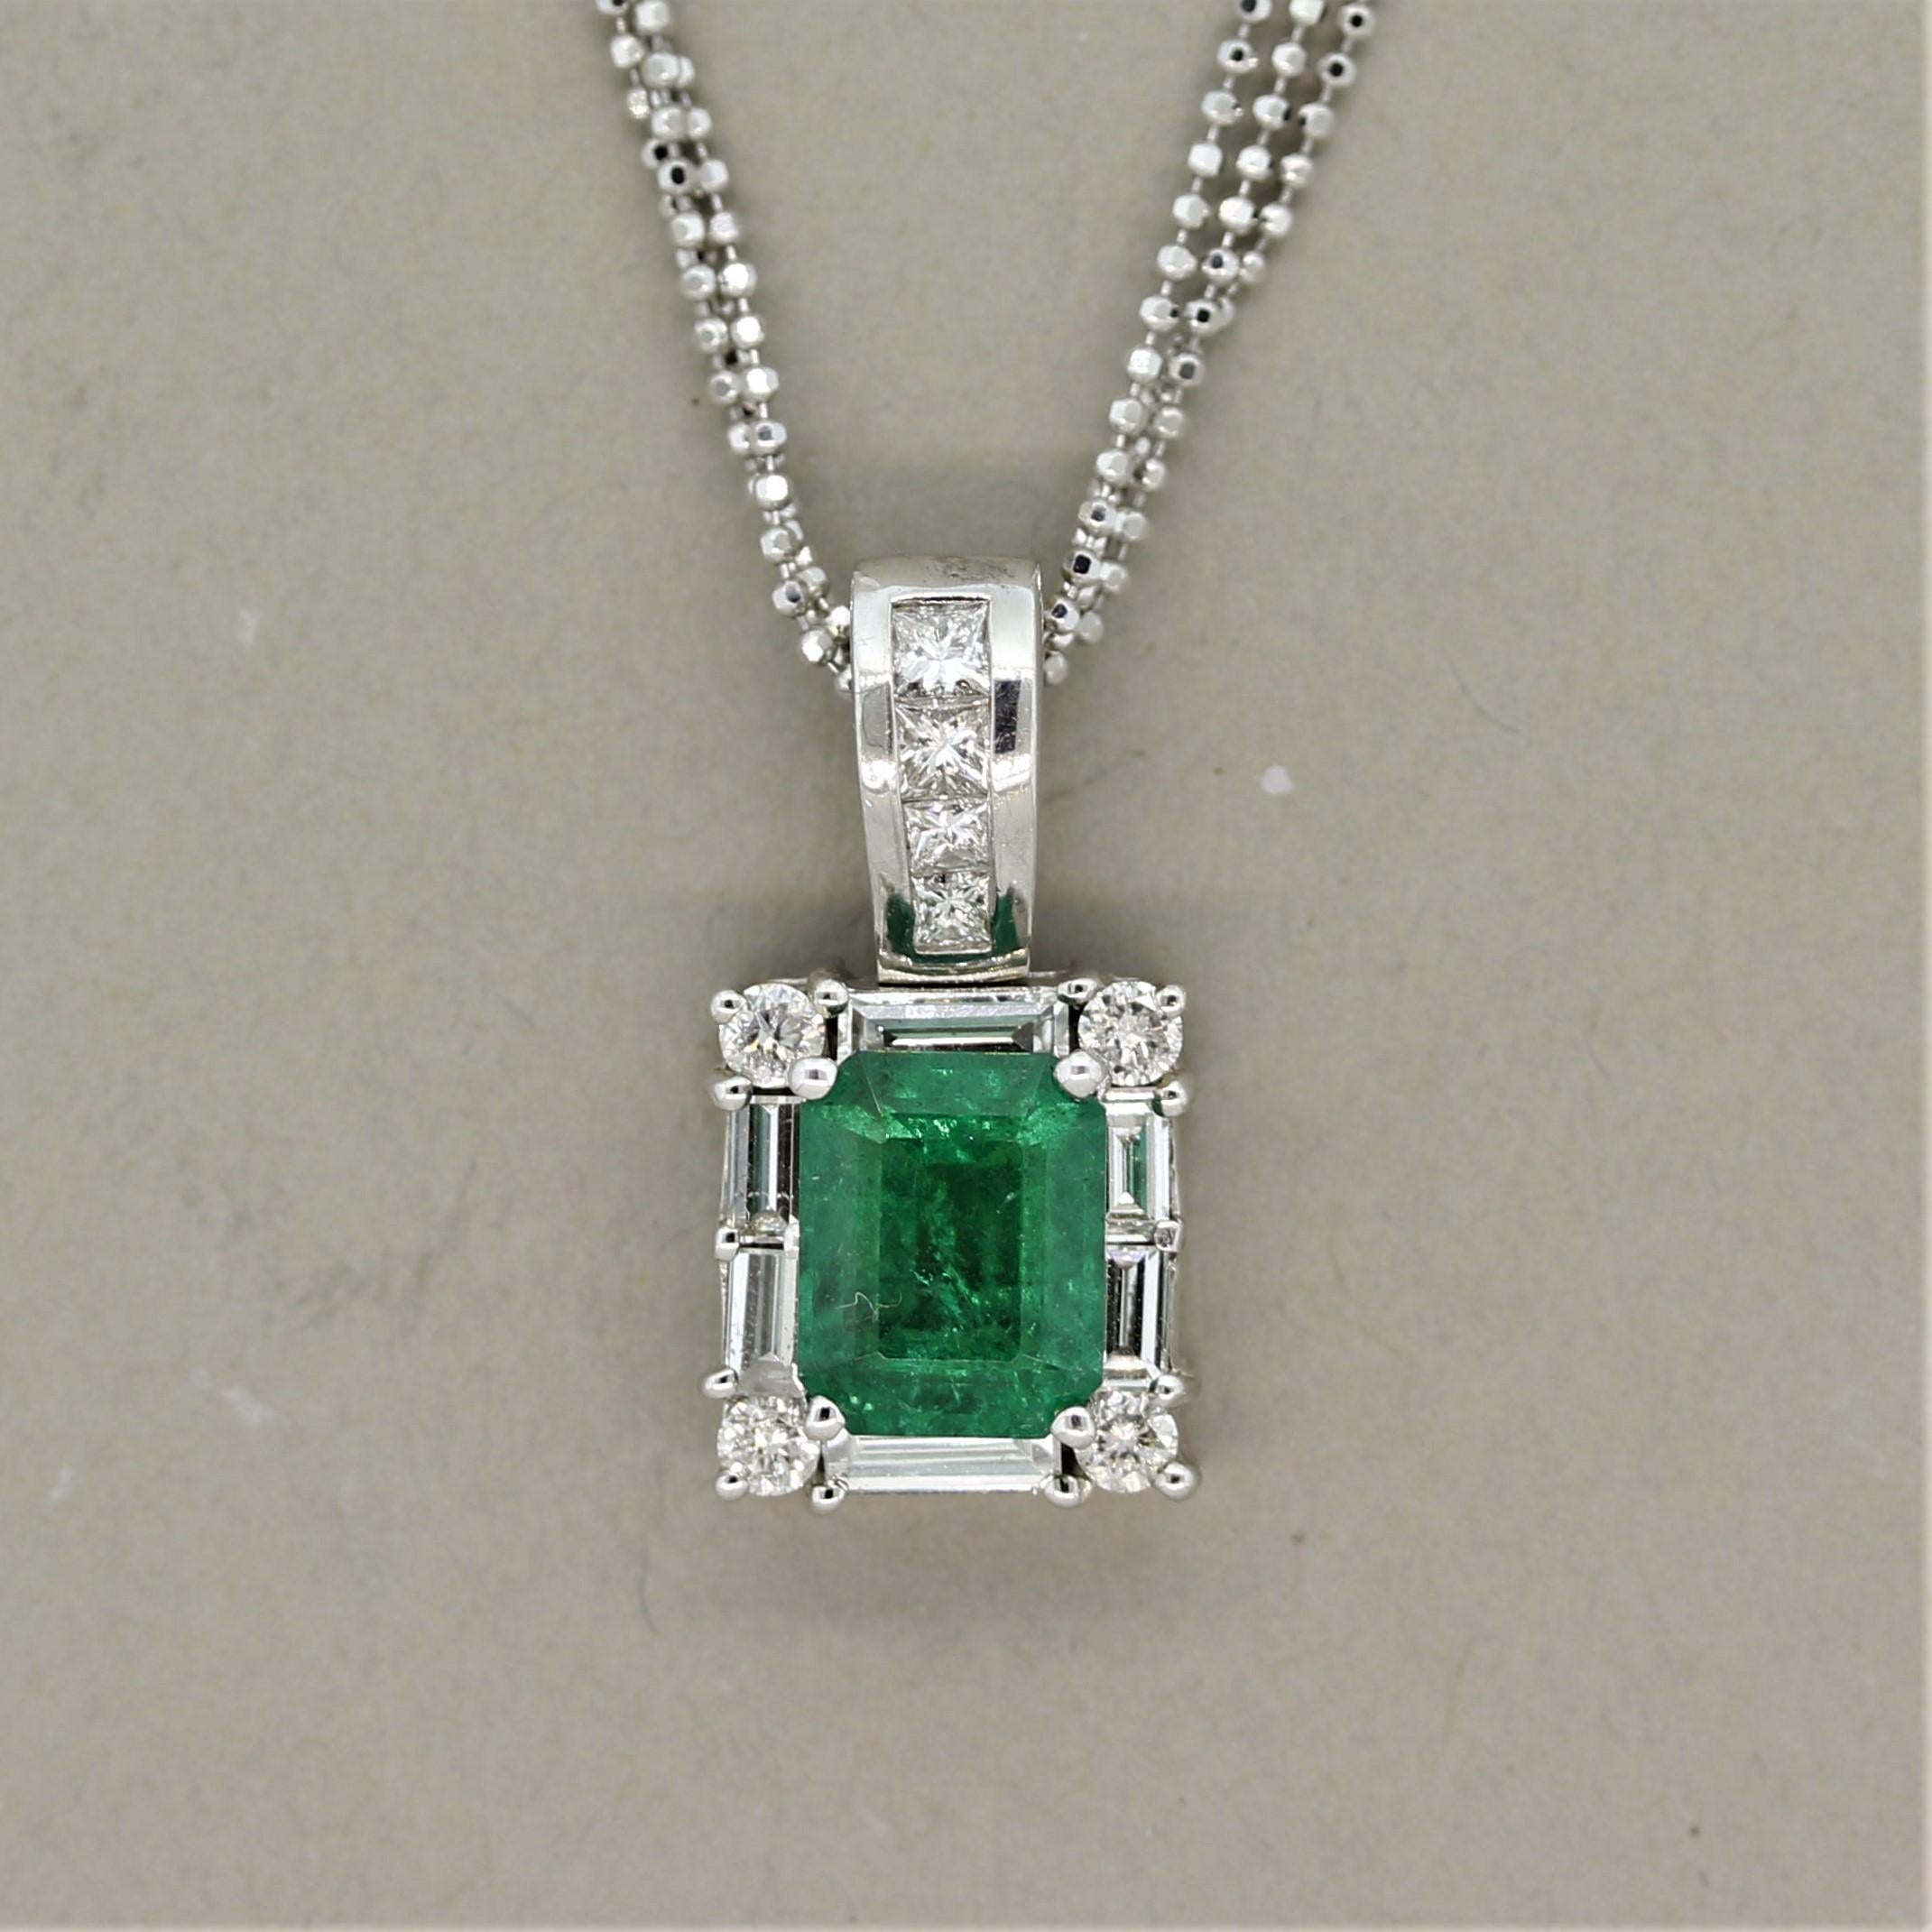 A crystalline gem of an emerald weighing 2.74 carats takes center stage in this pendant. It has a rich bright pure green color that is free of any major inclusions seen in most emeralds. This allows the stone's natural brilliance to shine. It is